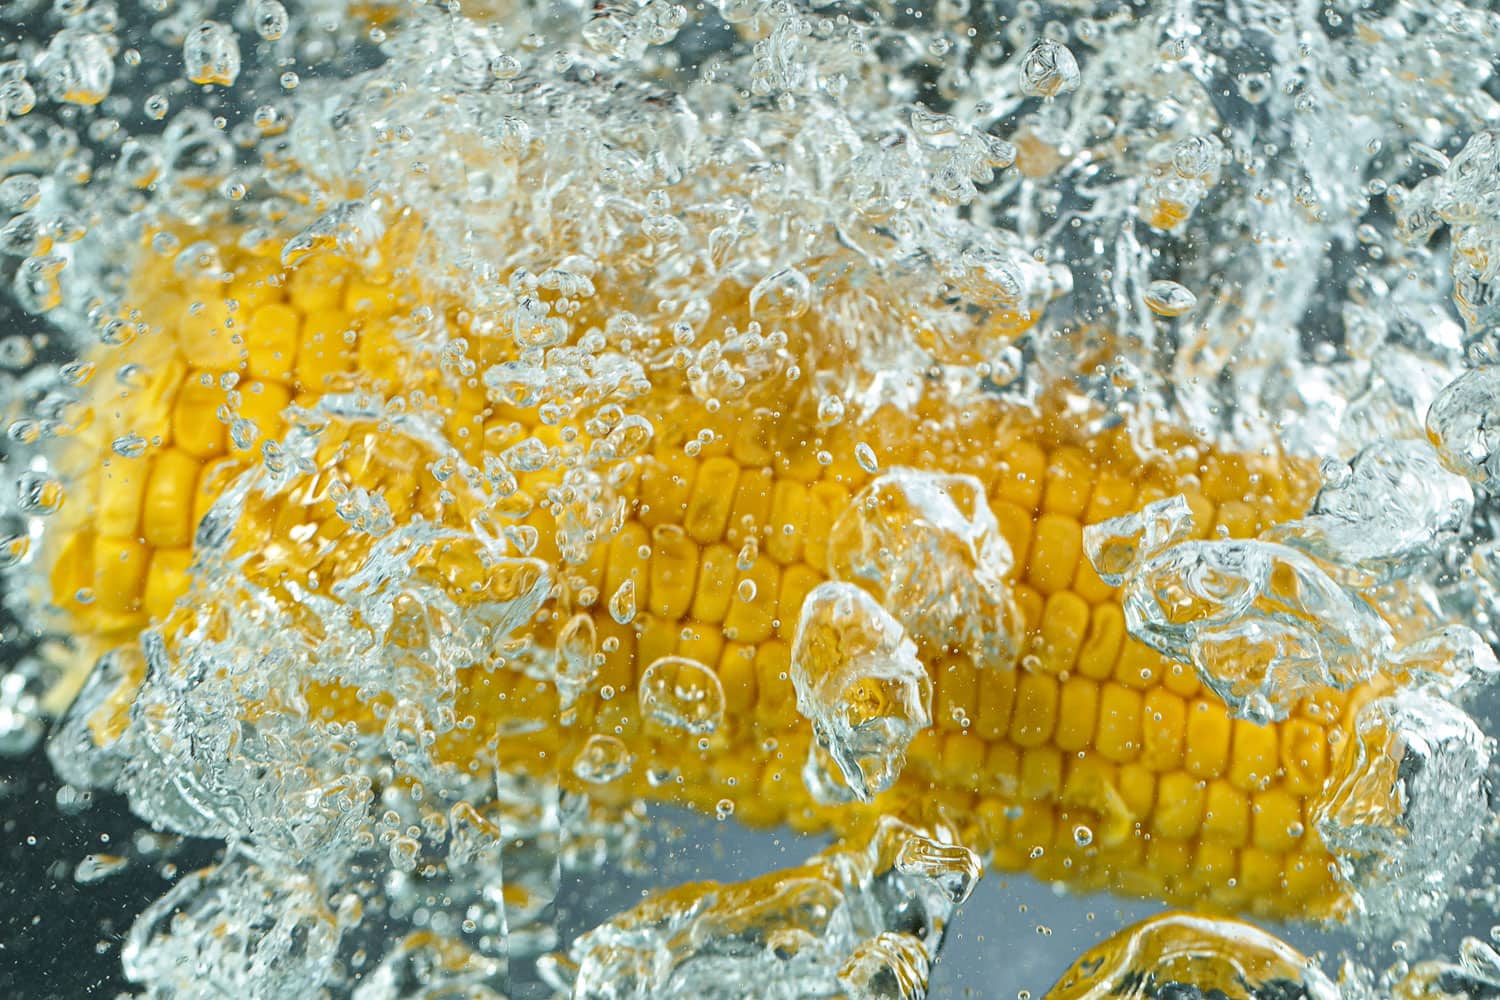 Throwing corn into boiled water, freeze motion, close-up. 